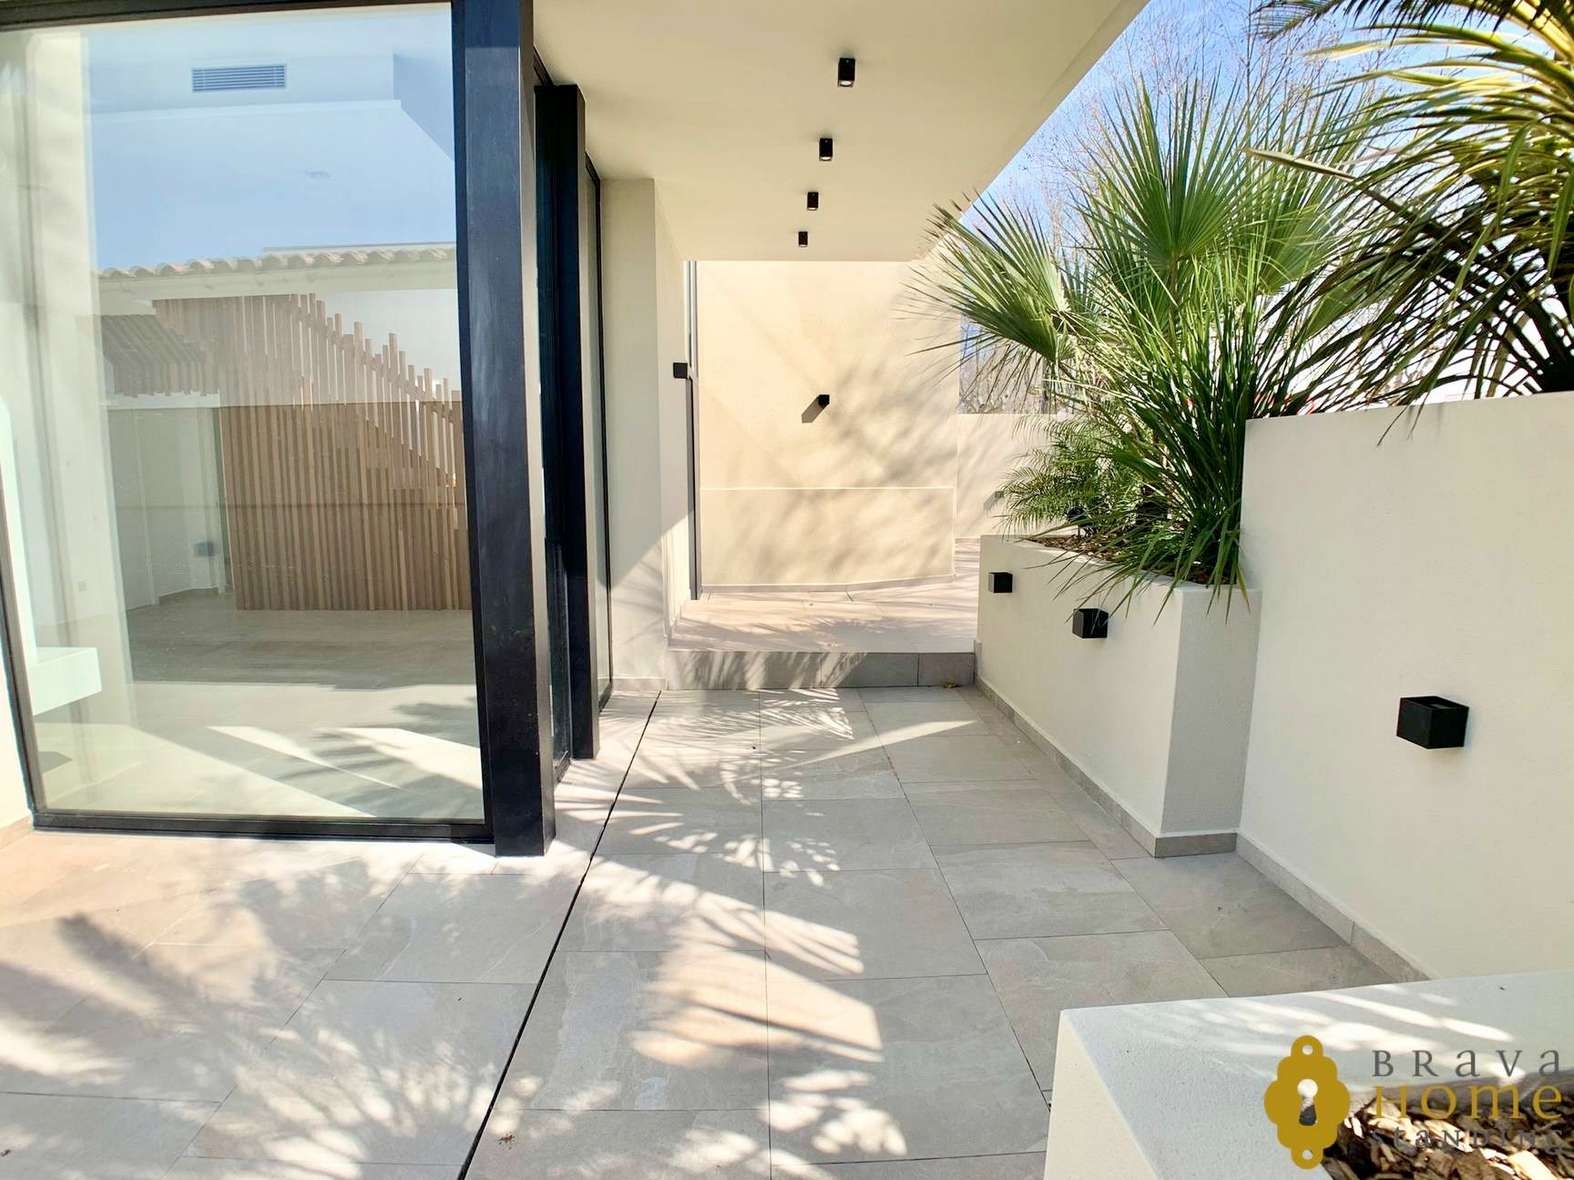 Magnificent newly built house on a wide canal with mooring for sale in Empuriabrava